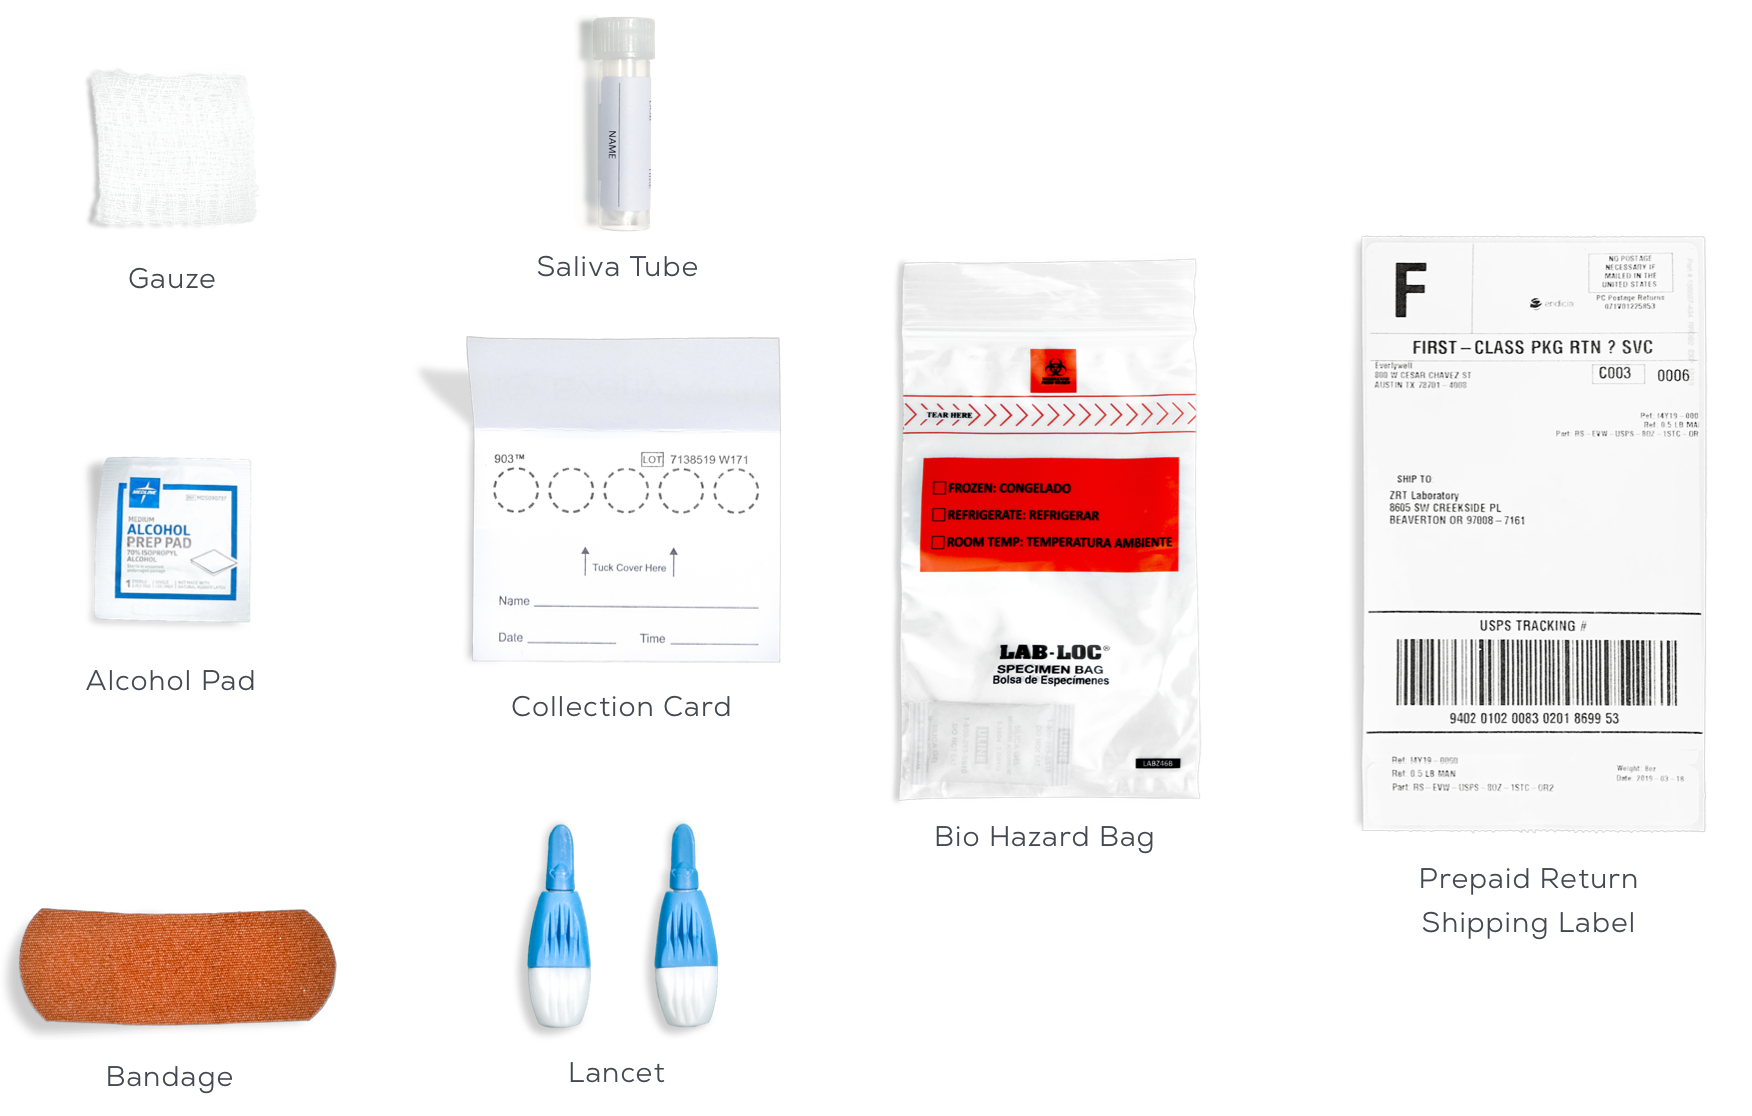 What's In The Box - Small Blood Card and 1 Tube Saliva Collection, Desktop- Metabolism, Men's Health